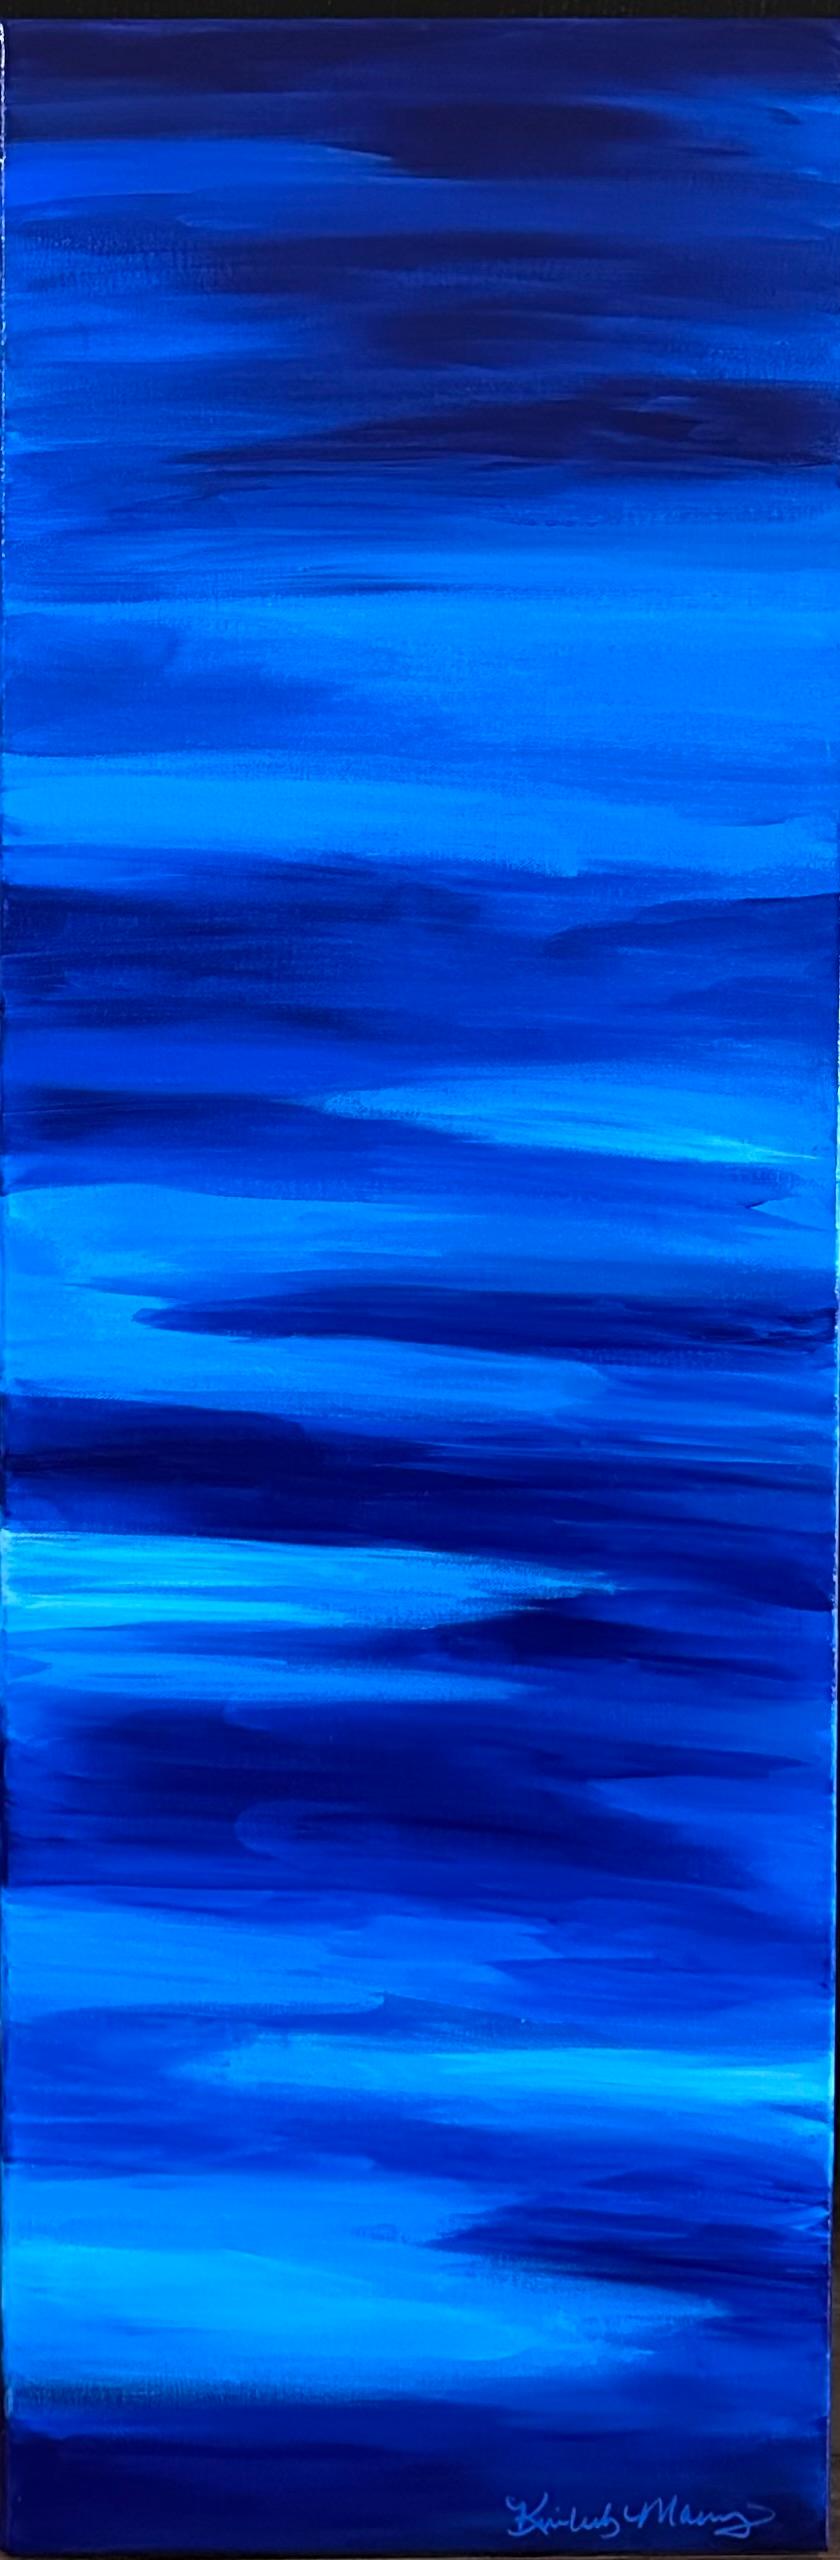 Kimberly Marney Abstract Painting - Blue Horizon #1 (Blue, Abstract, Water, Landscape)